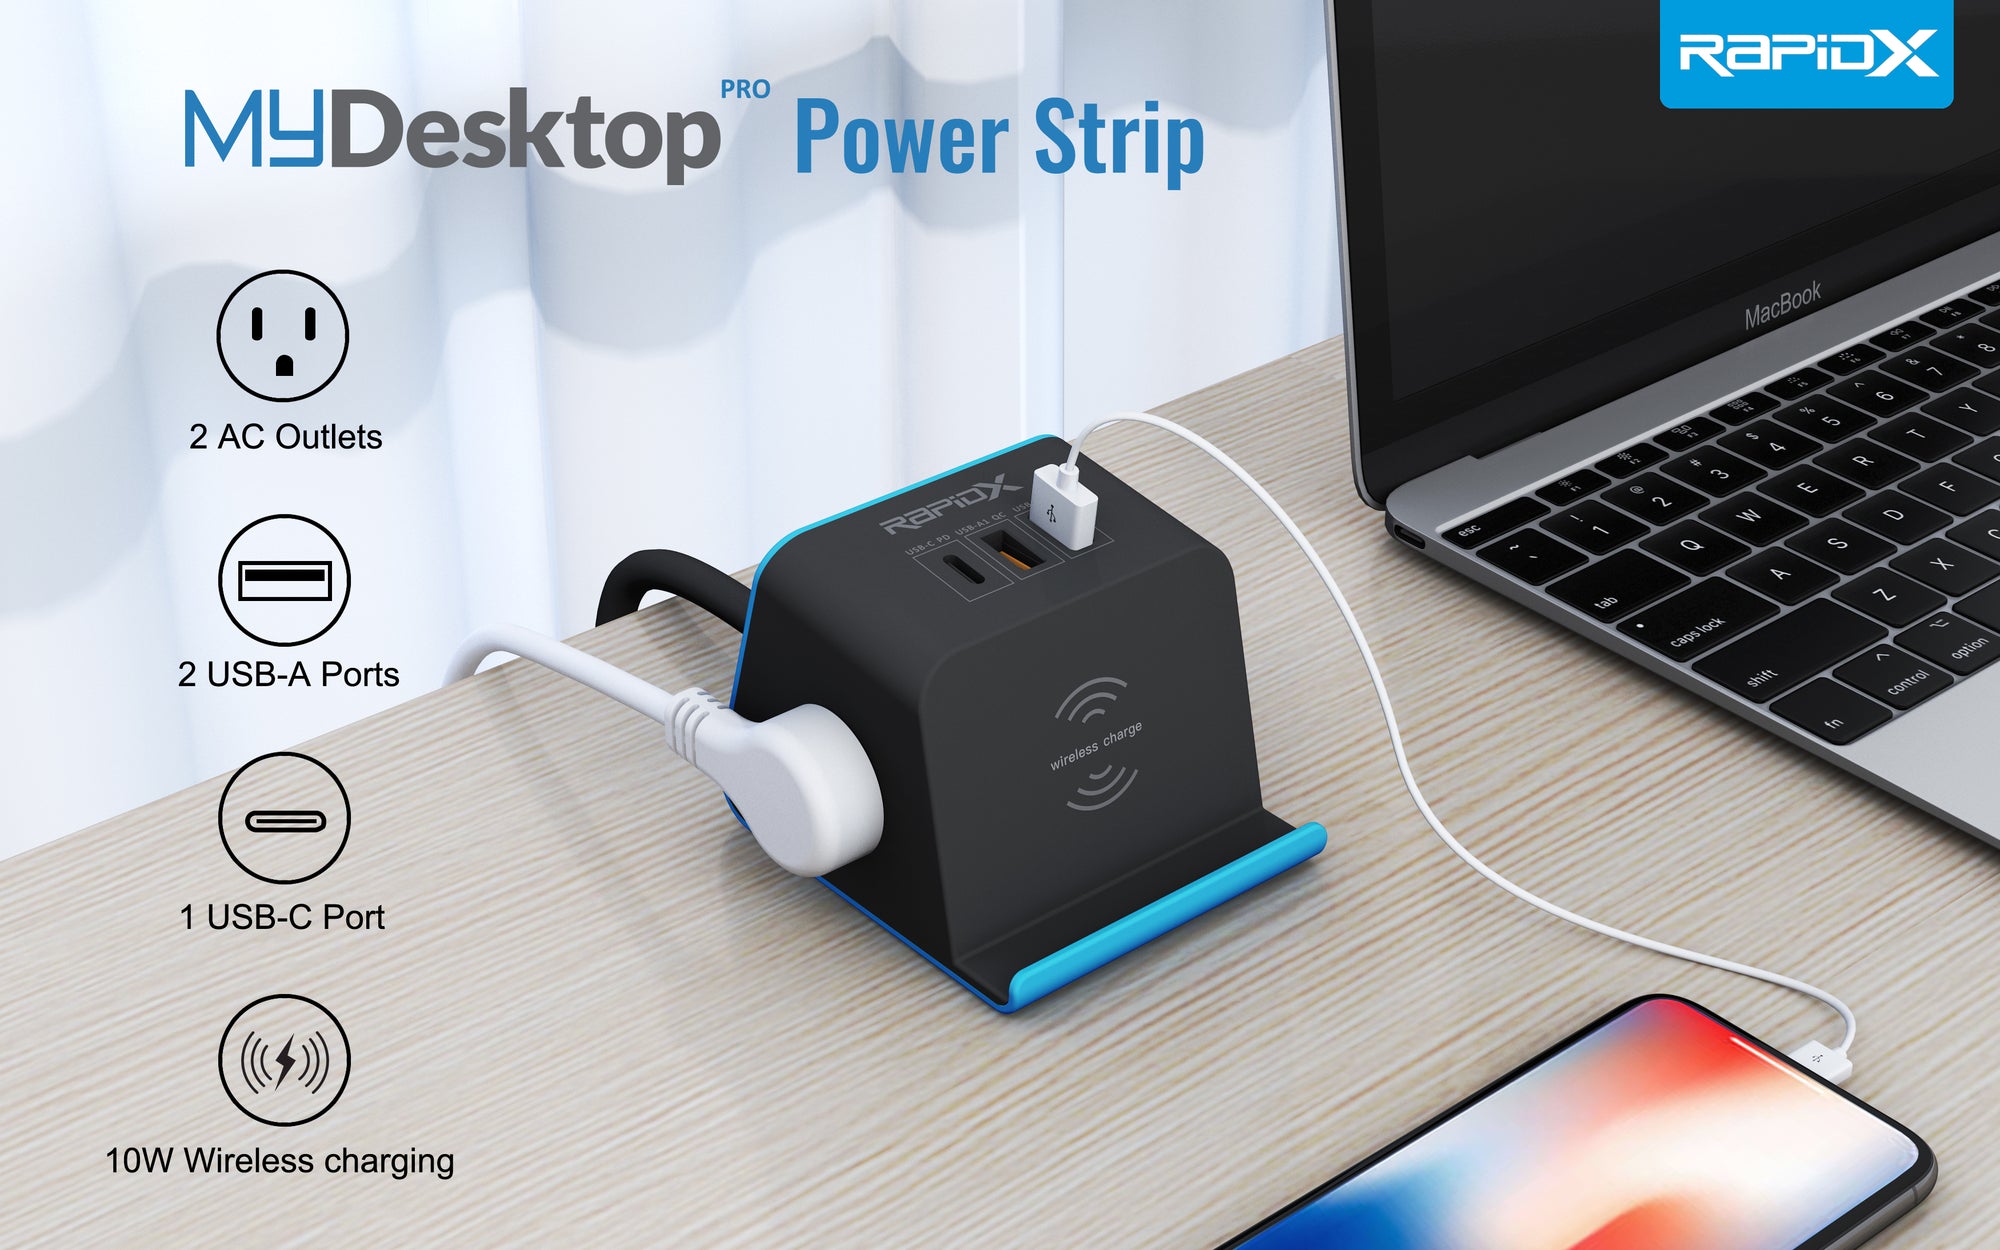 MyDesktop Pro 60W 3 USB Ports and 2 Power Outlets Power Station with Wireless Charging Stand for iPhone, Android, Tablets and Laptops